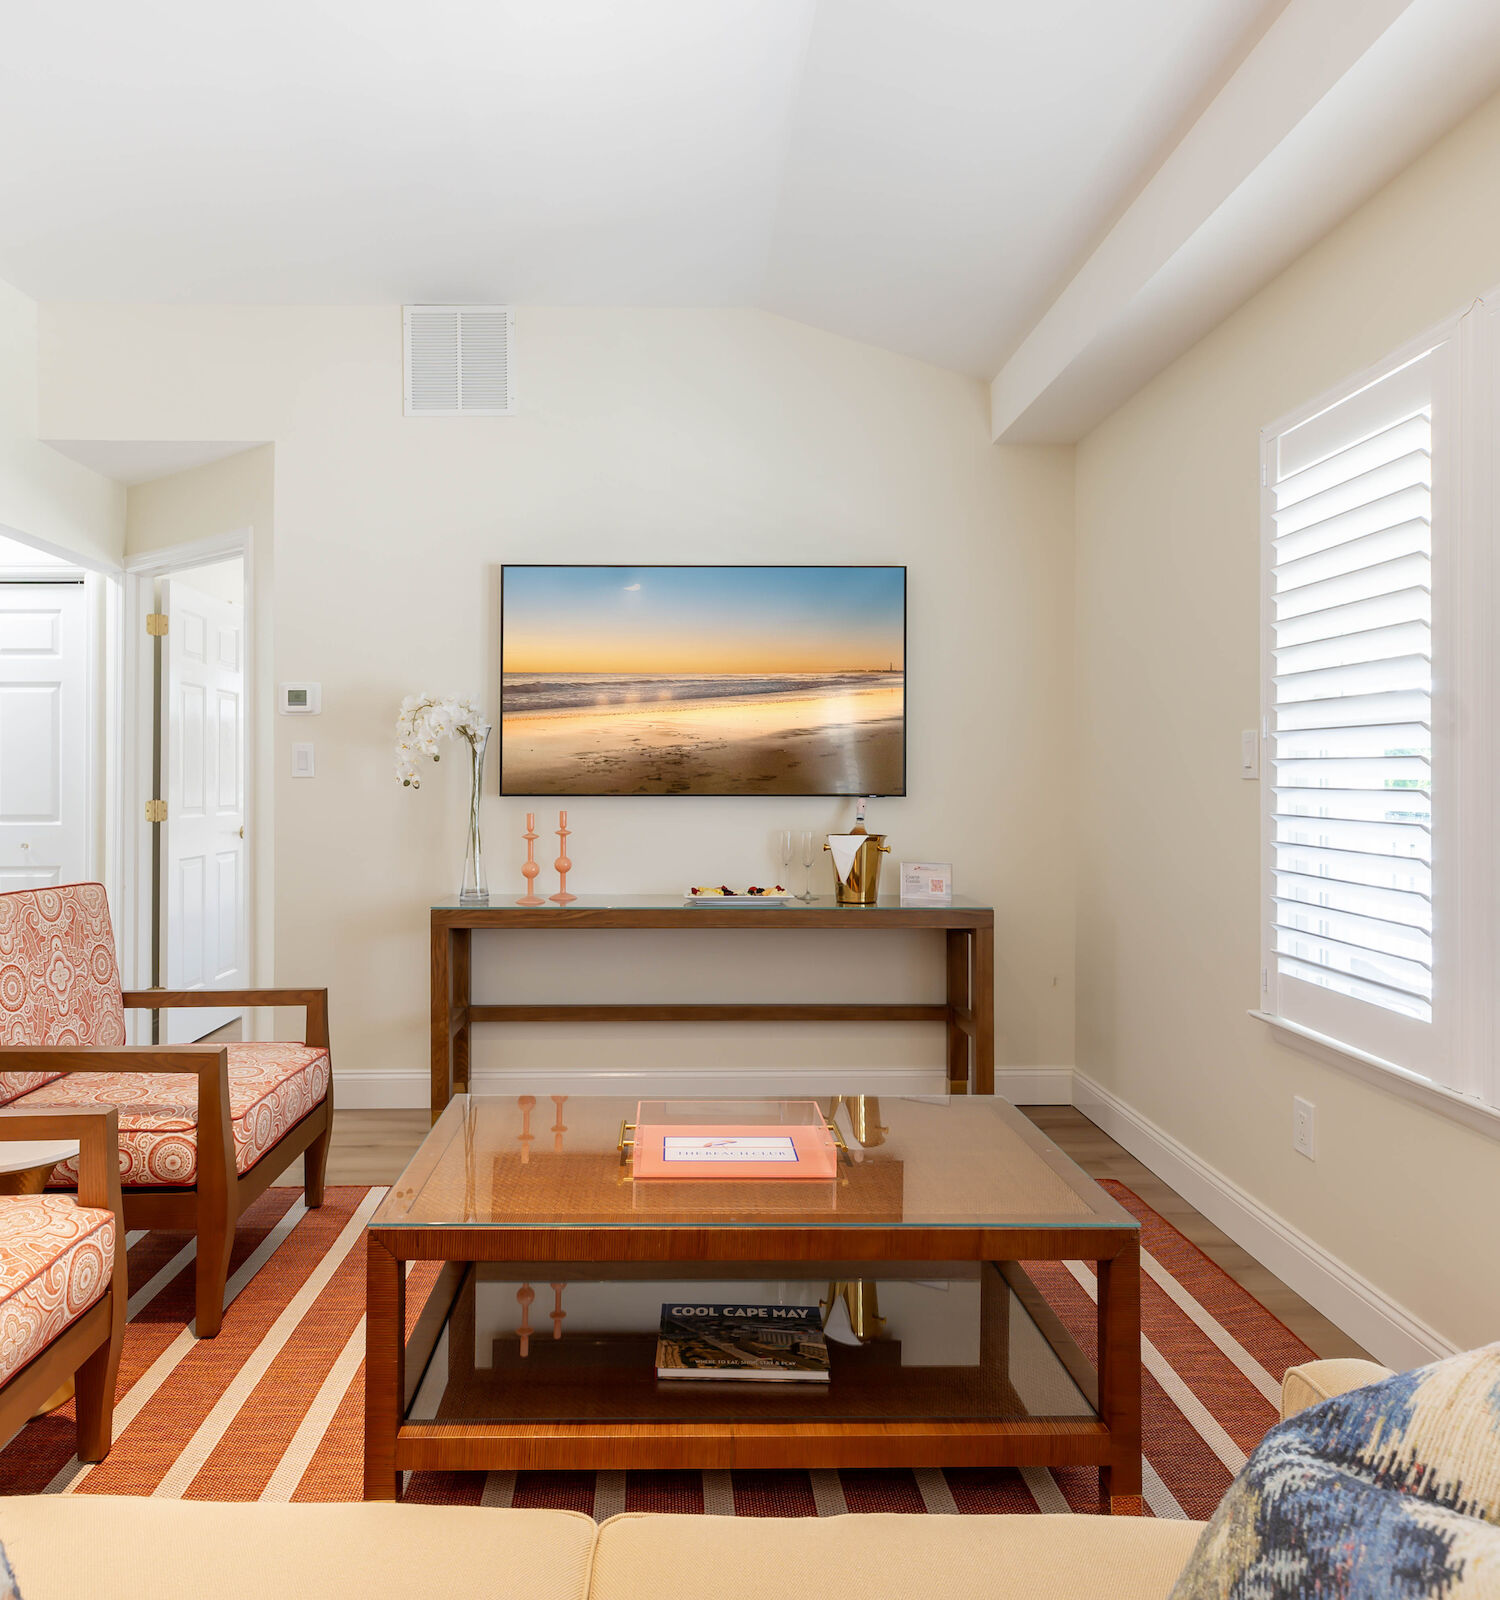 A cozy living room with beige walls, orange-patterned chairs, a wooden coffee table, and a wall-mounted TV displaying a beach scene.